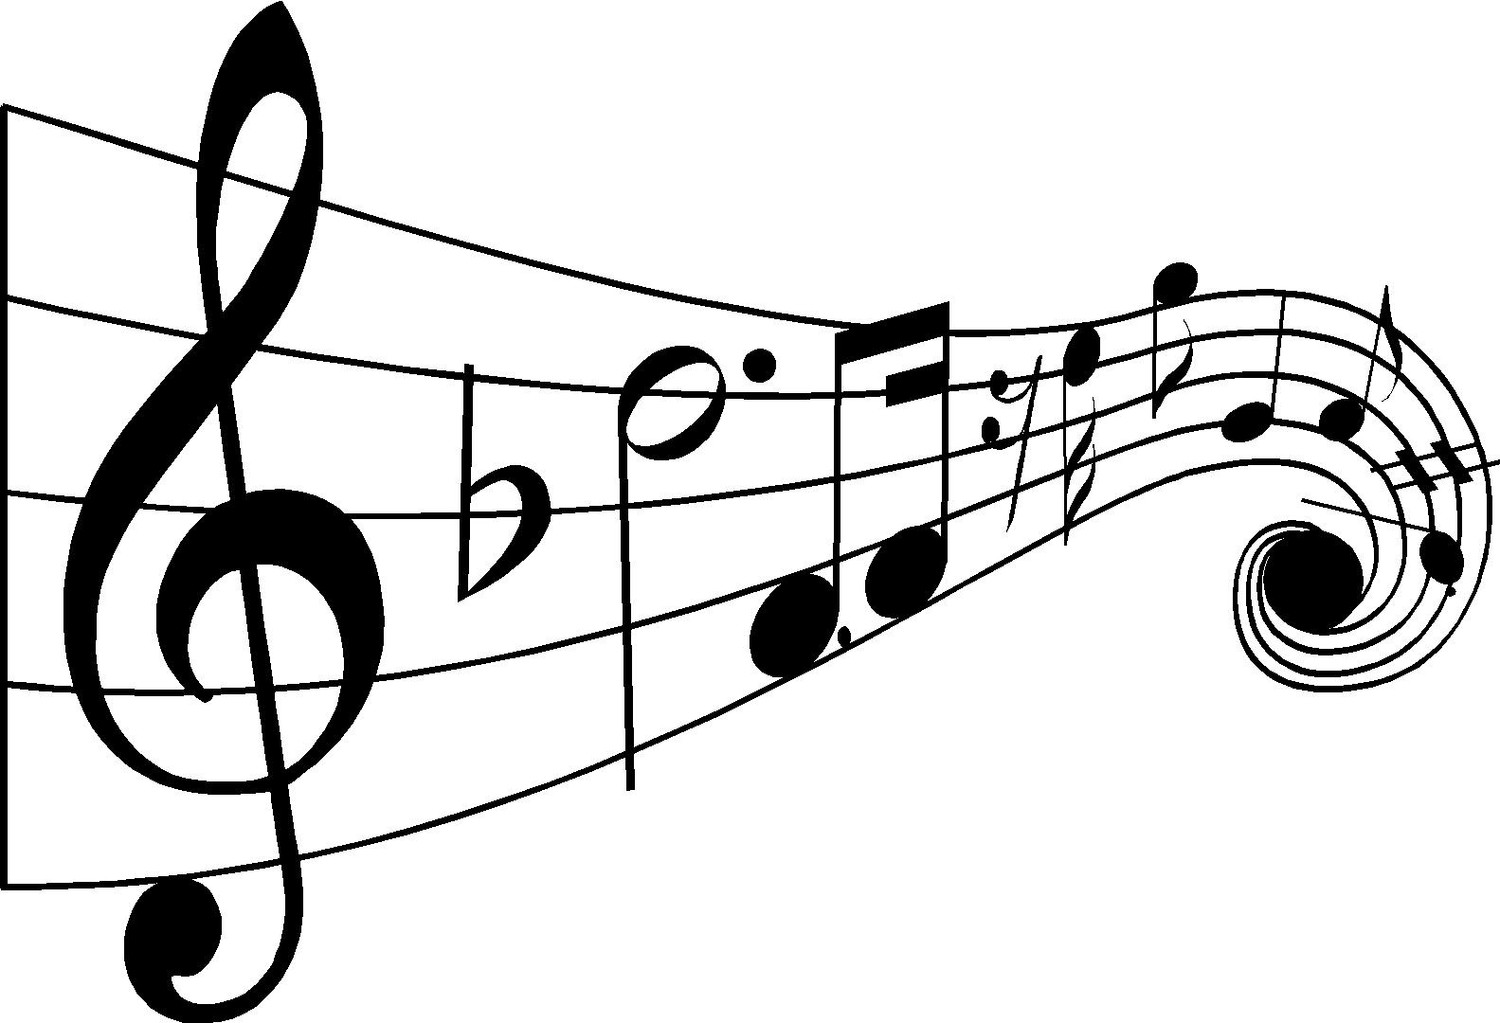 Music notes musical clip art free music note clipart 3.